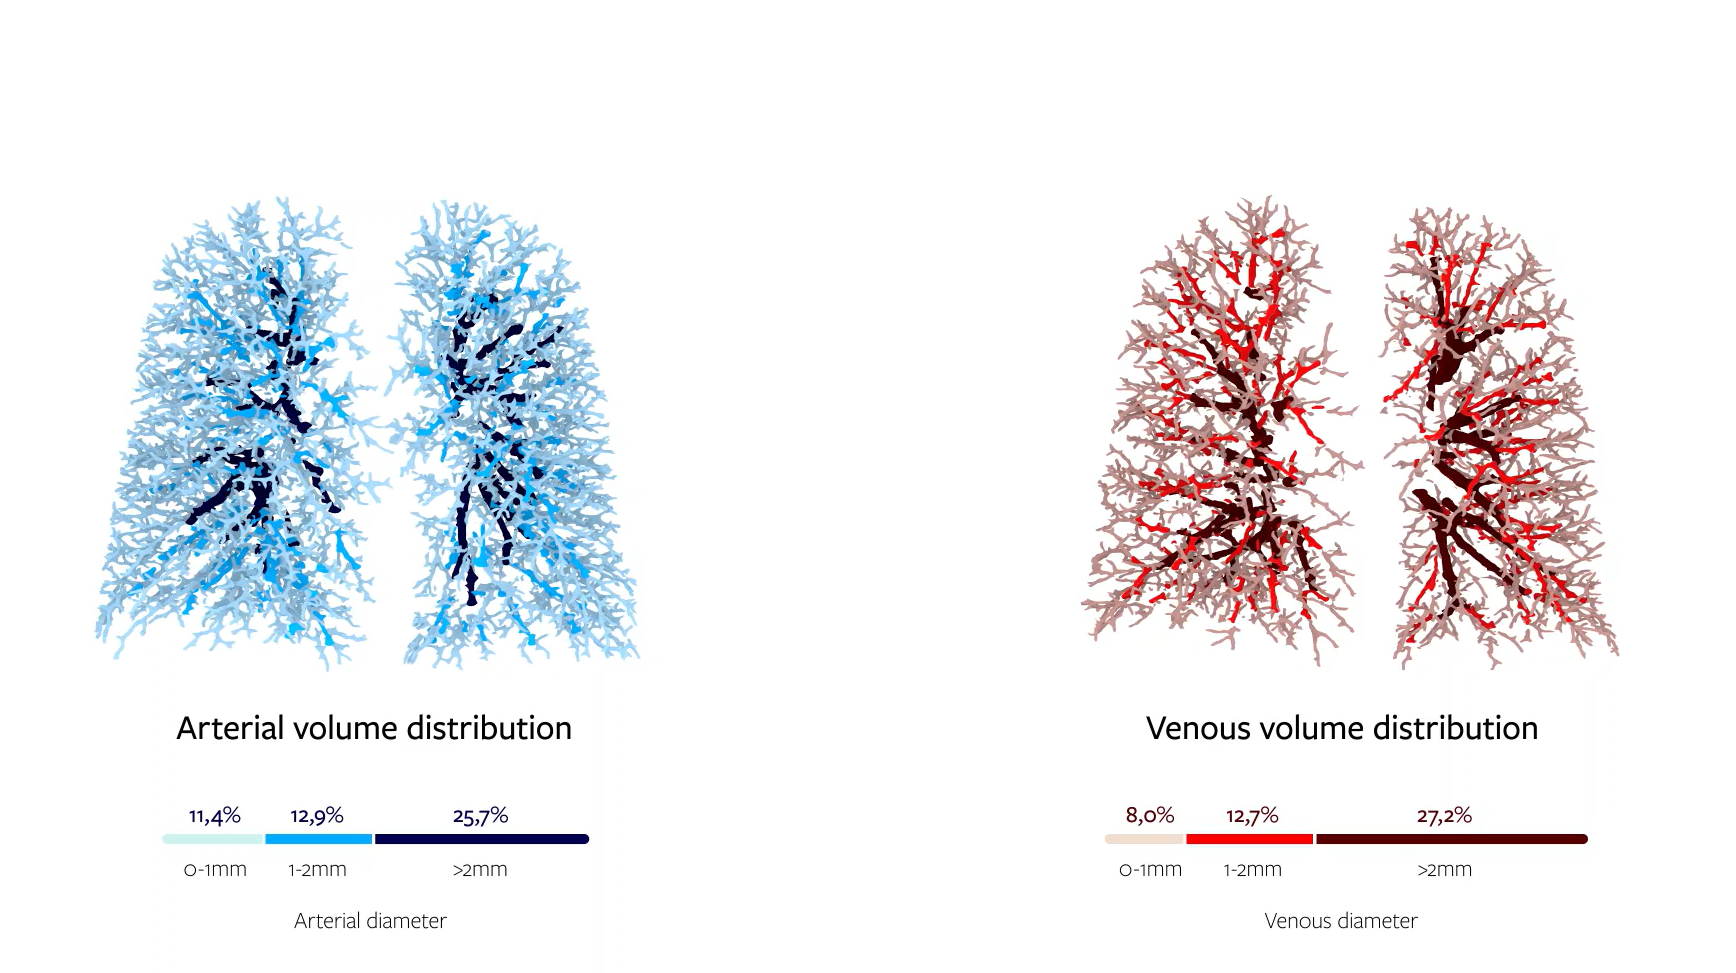 Pulmonary arterial and venous volume distribution and measurements